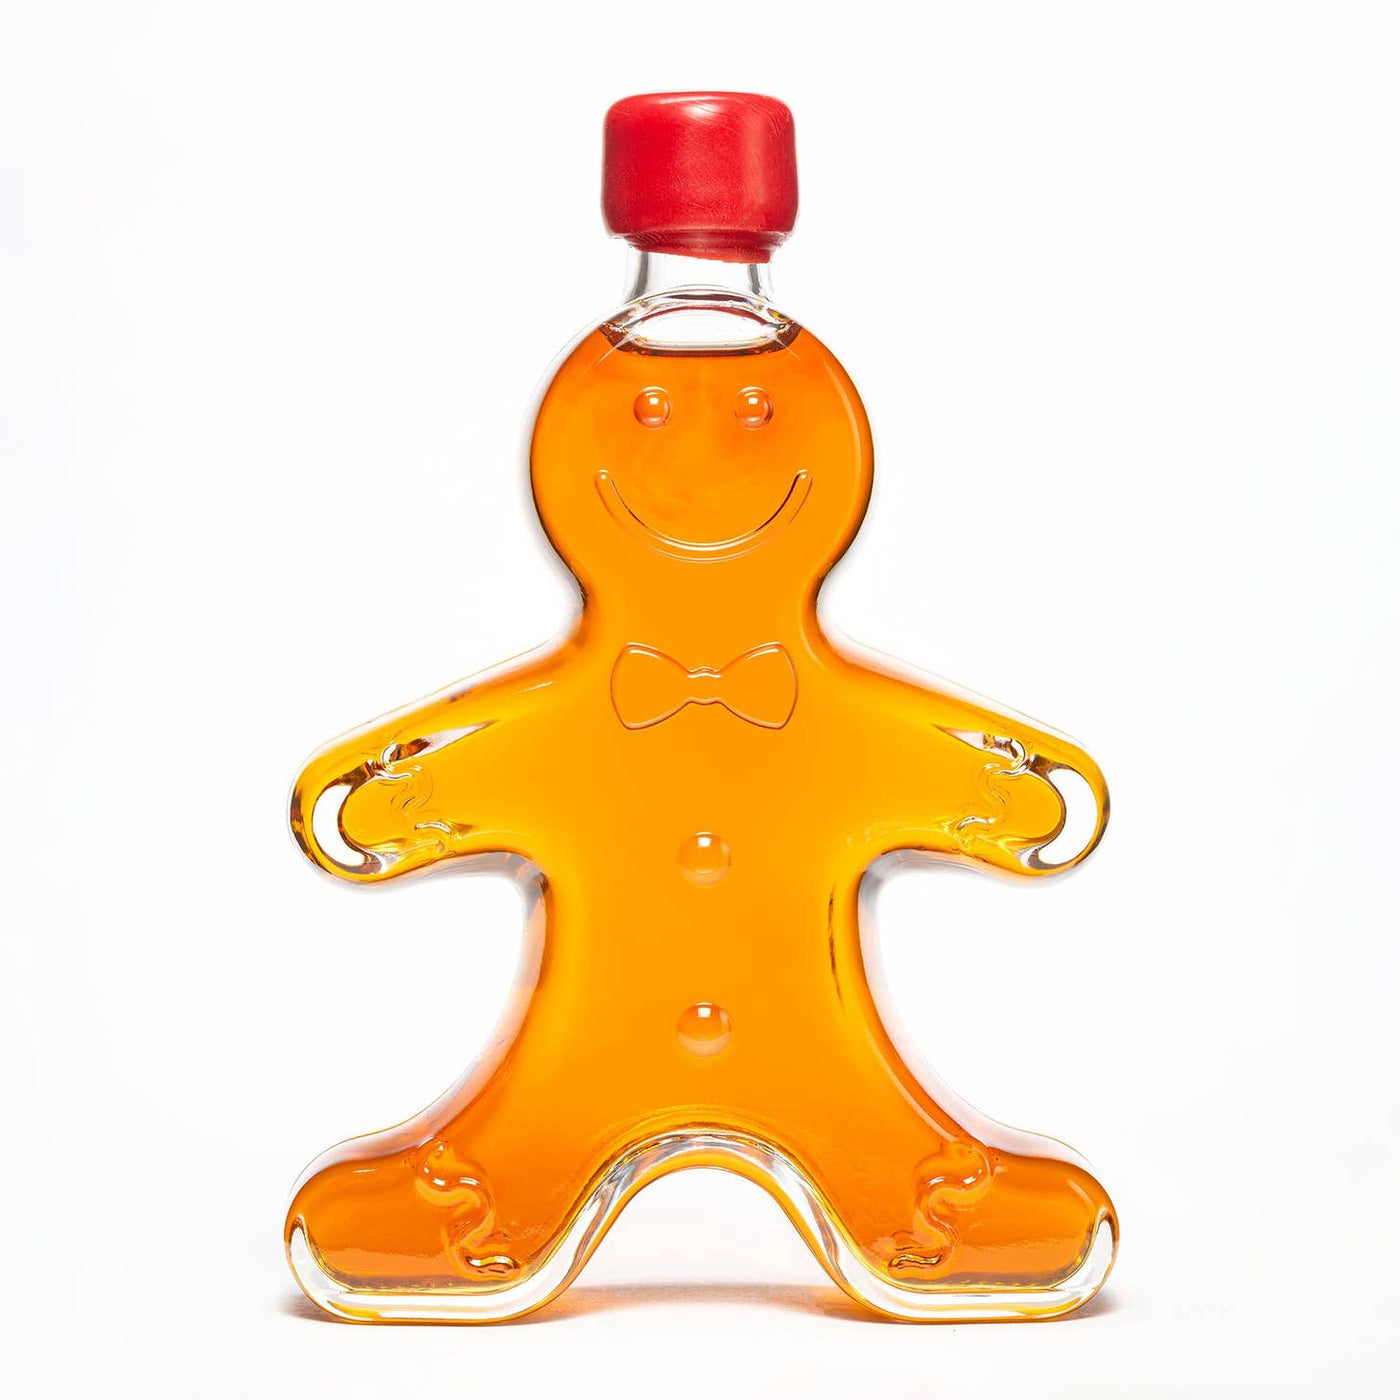 Pure Vermont Maple Syrup, Gingerbread Man Glass by Silloway Maple